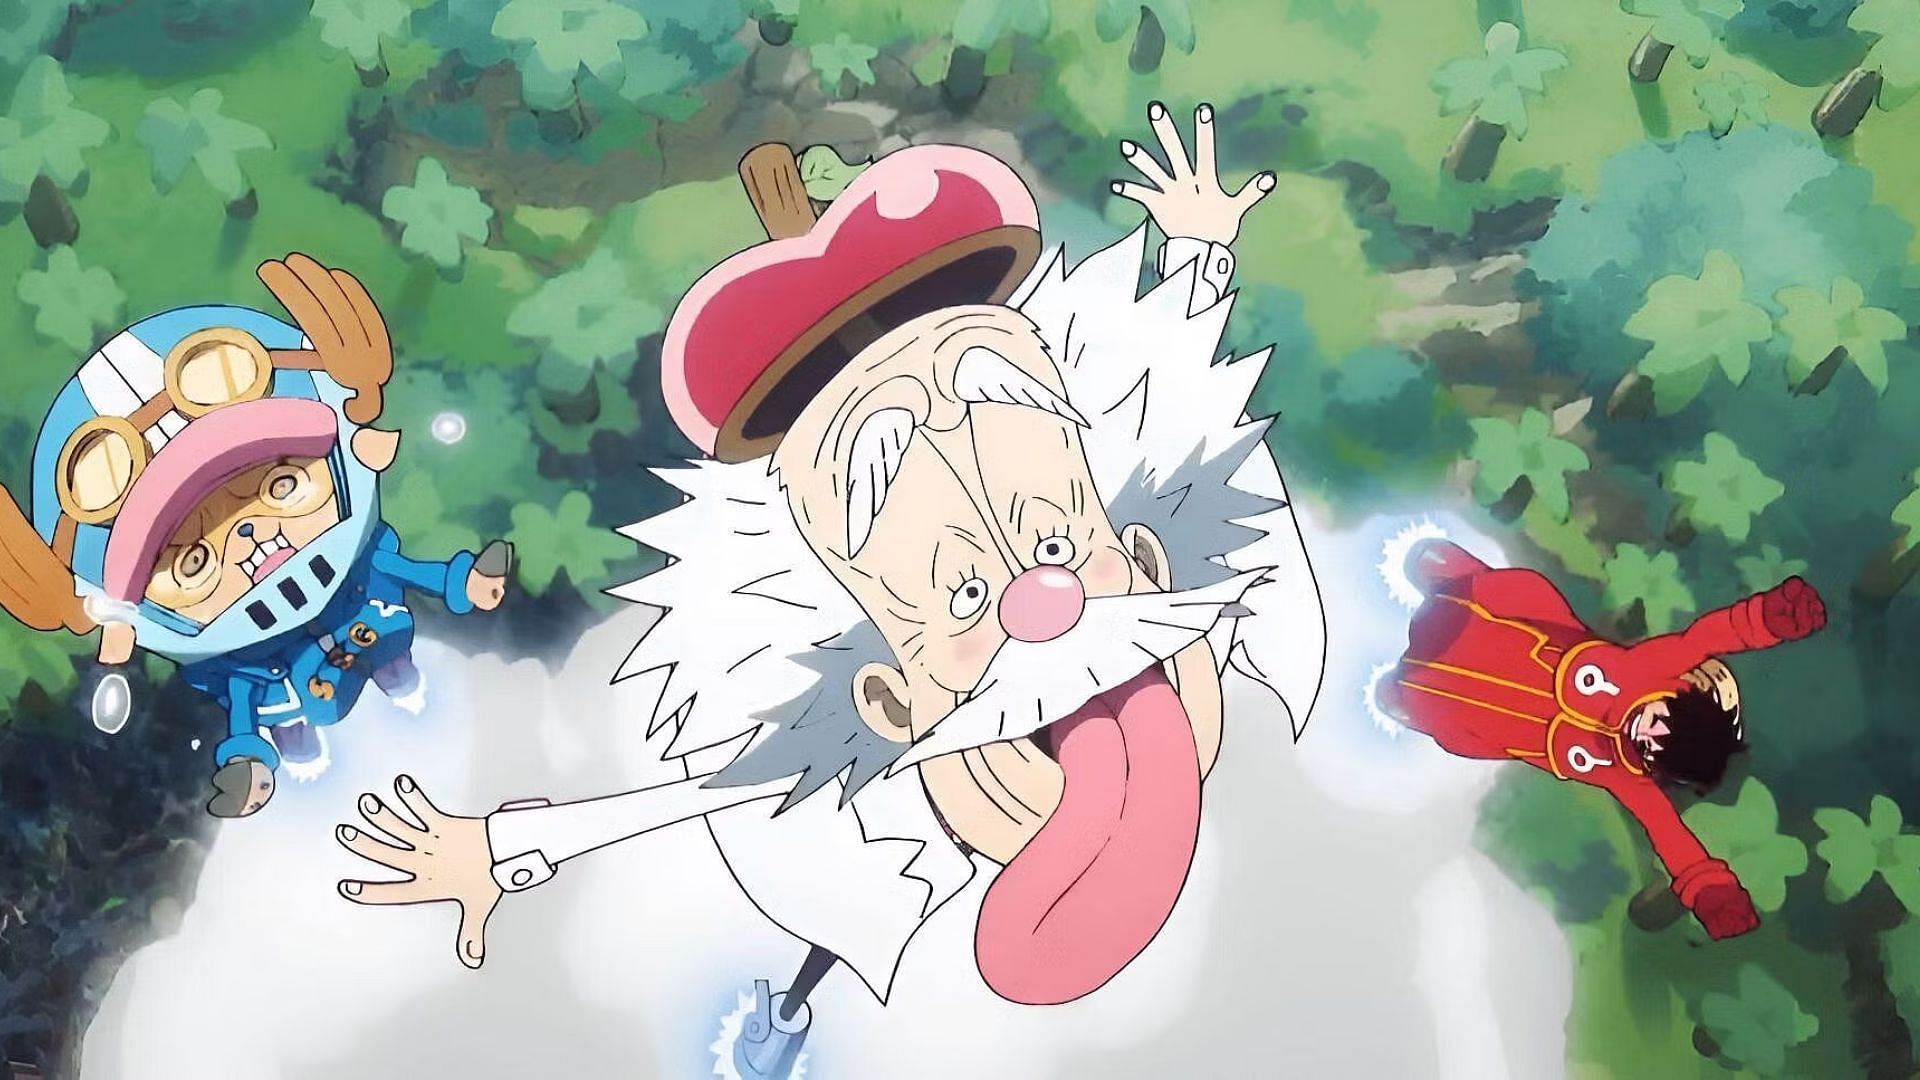 Dr. Vagapunk as shown in the anime (Image via Toei Animation)